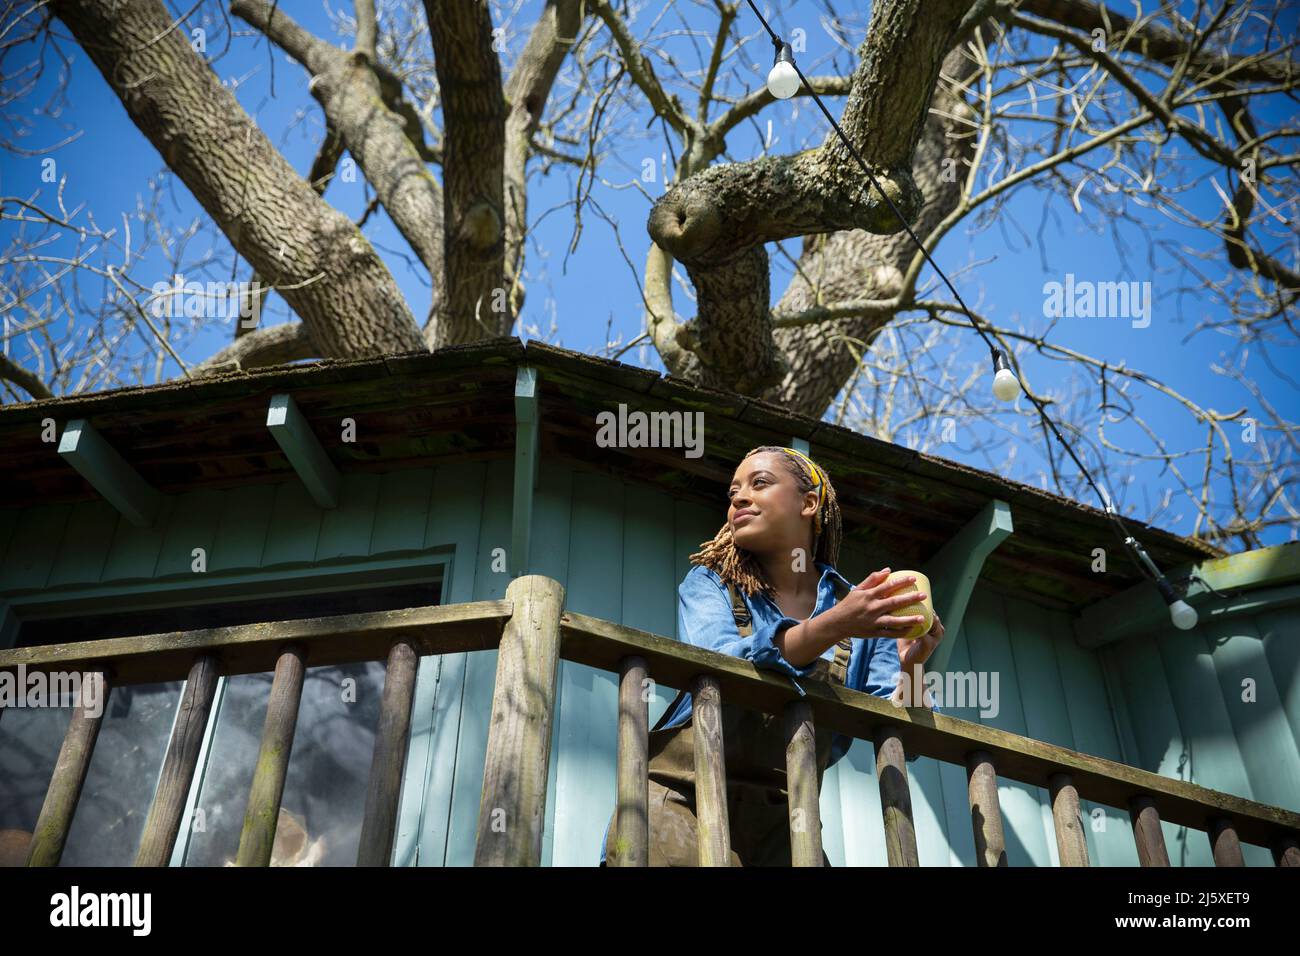 Smiling young woman drinking coffee on tree house balcony Stock Photo